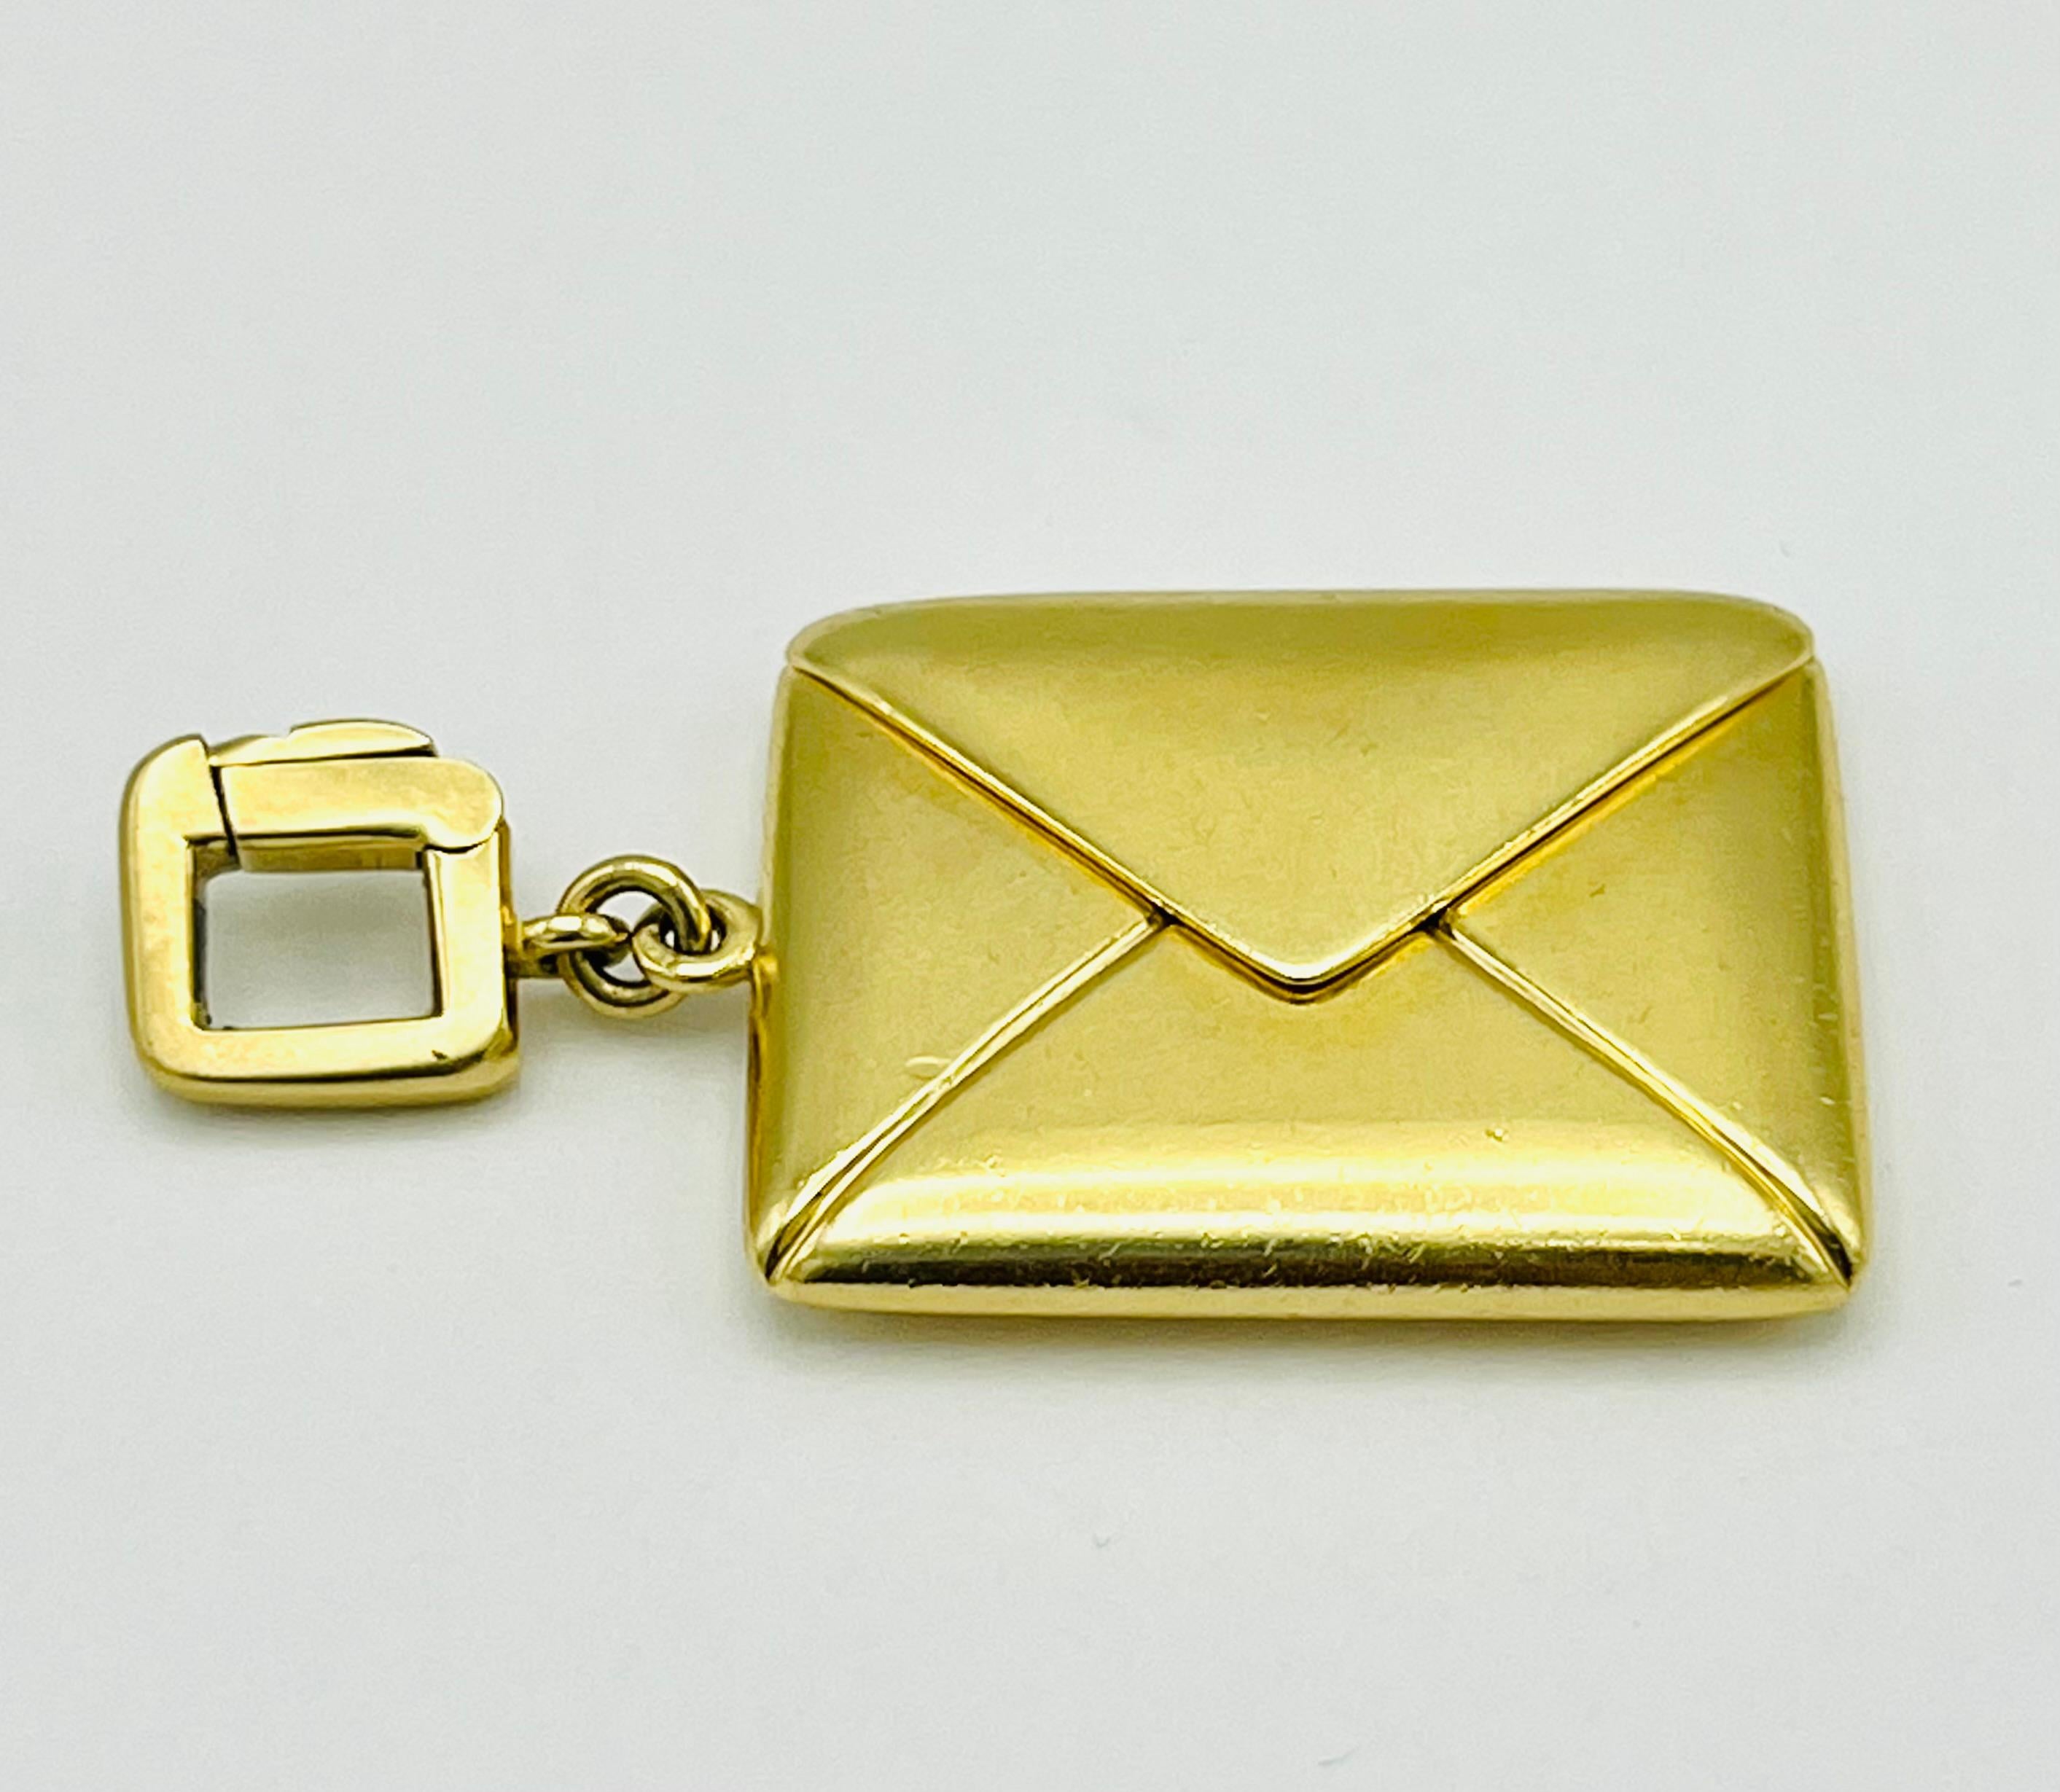 Product details:

The charm is made out of 18K yellow gold with the engraving on the back: 